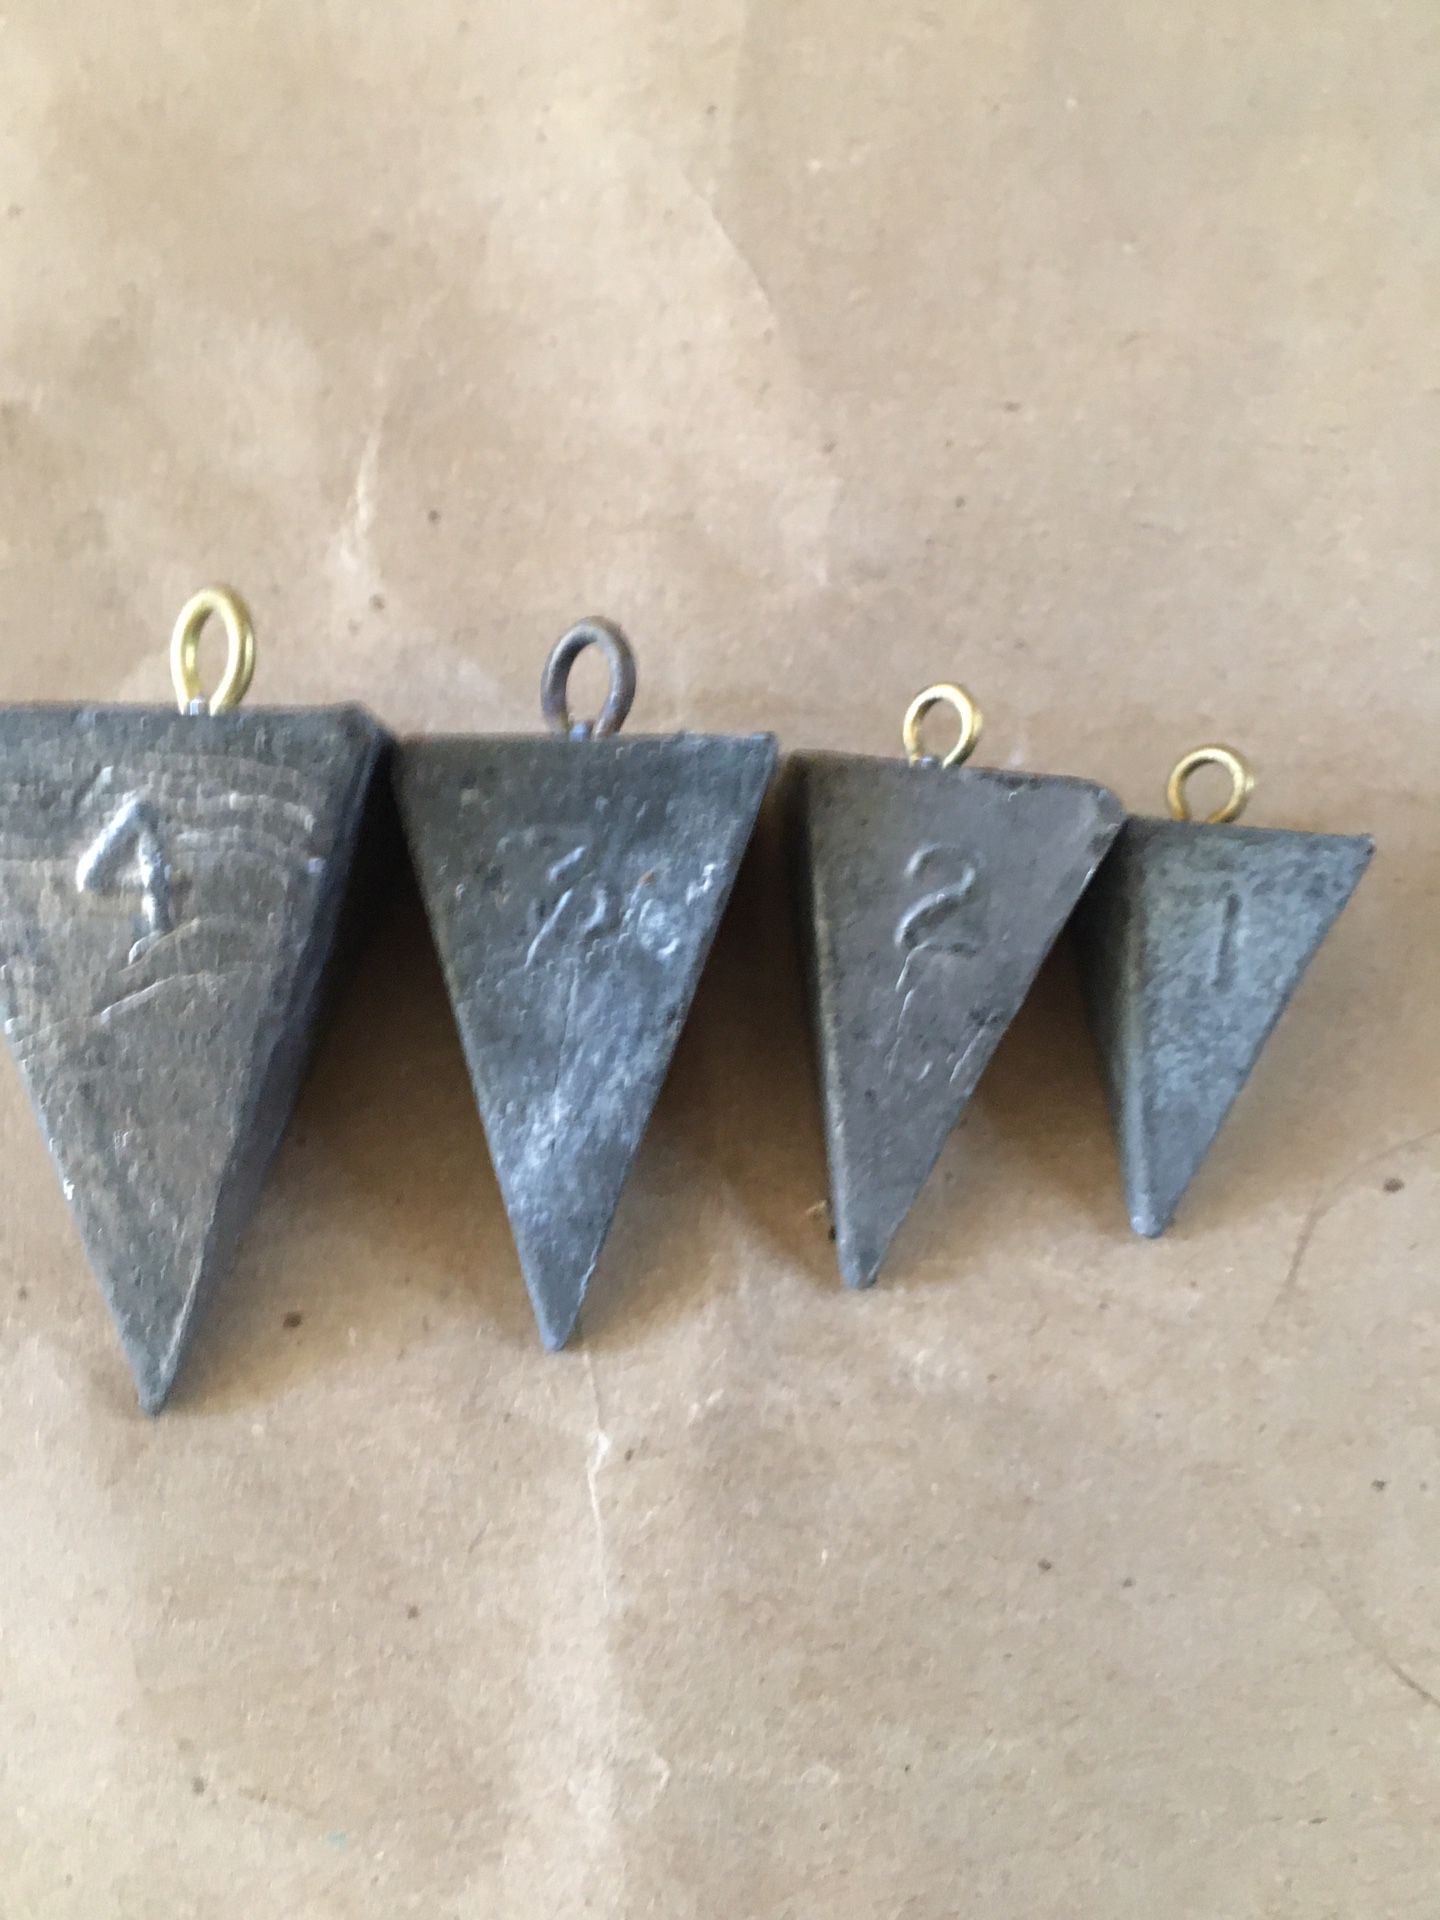 Fishing weights lead (4) lot 5